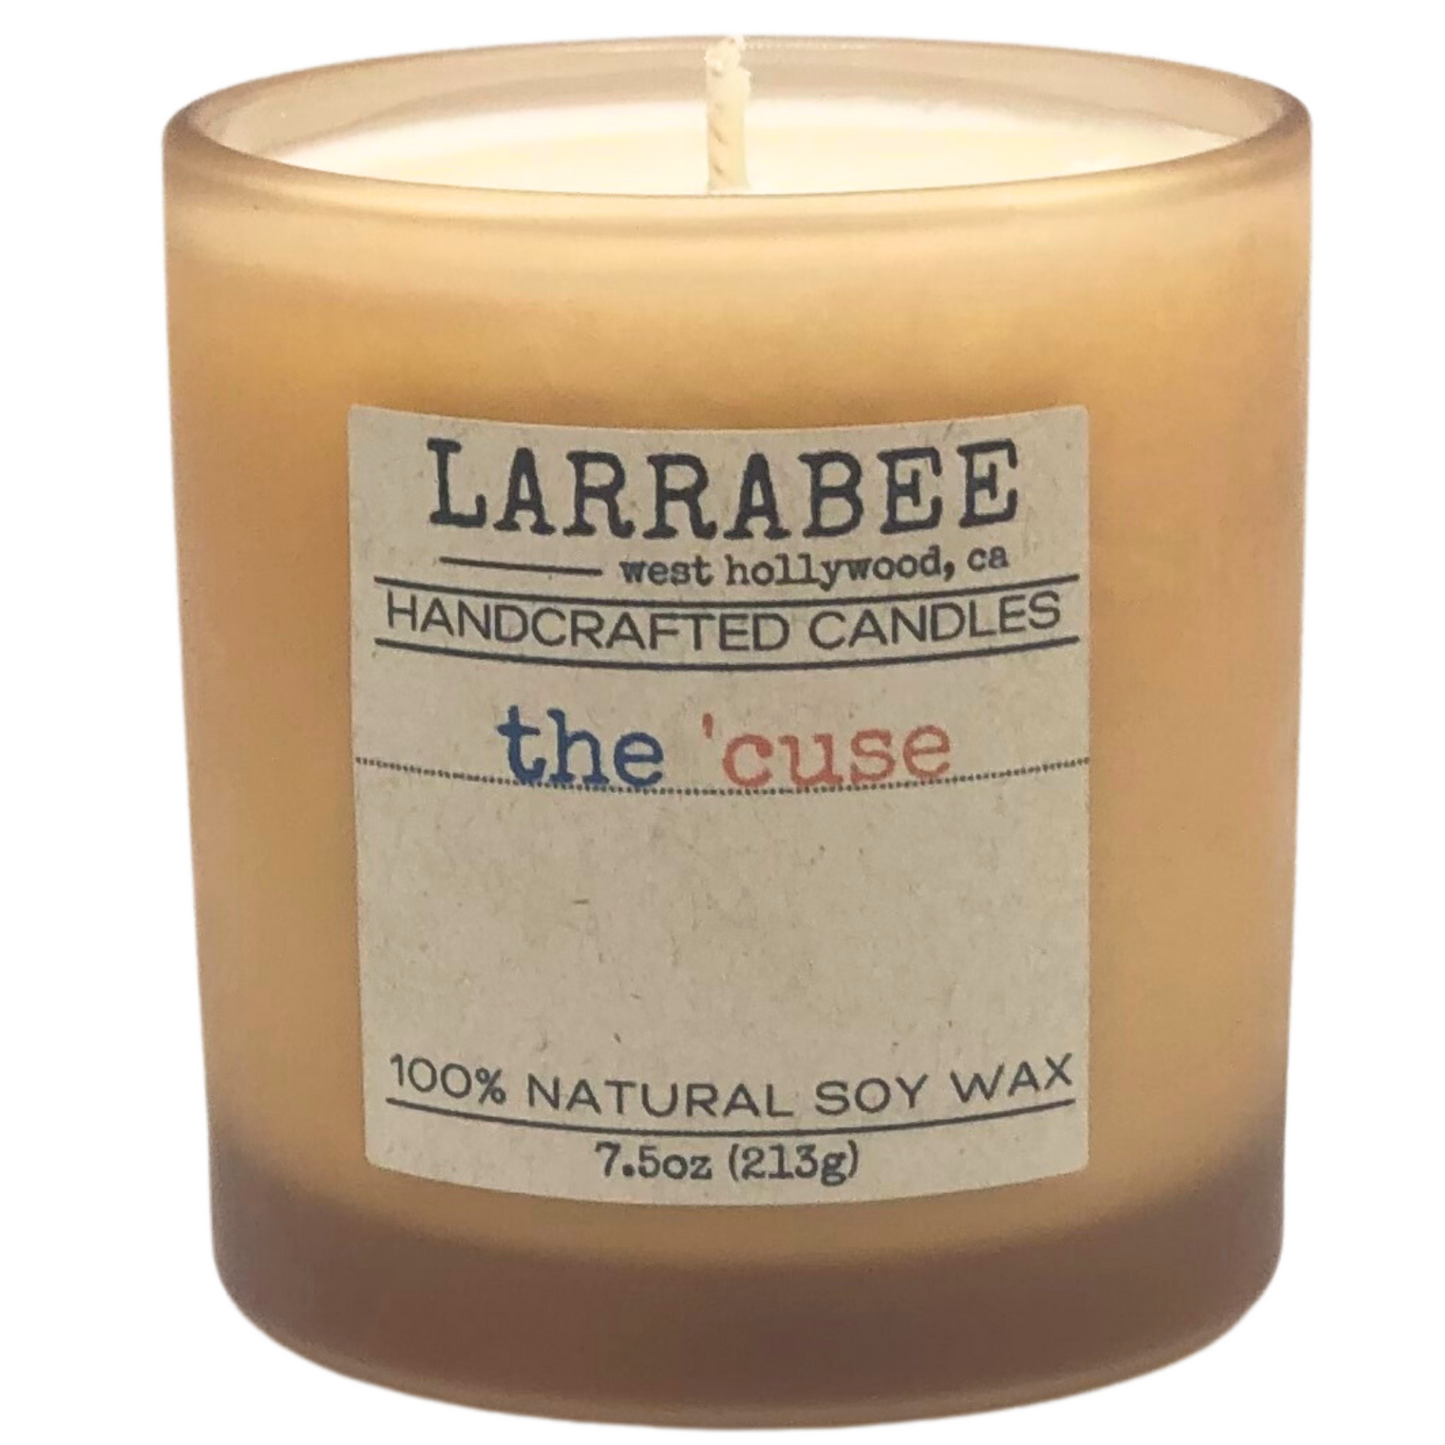 The 'Cuse handcrafted candle